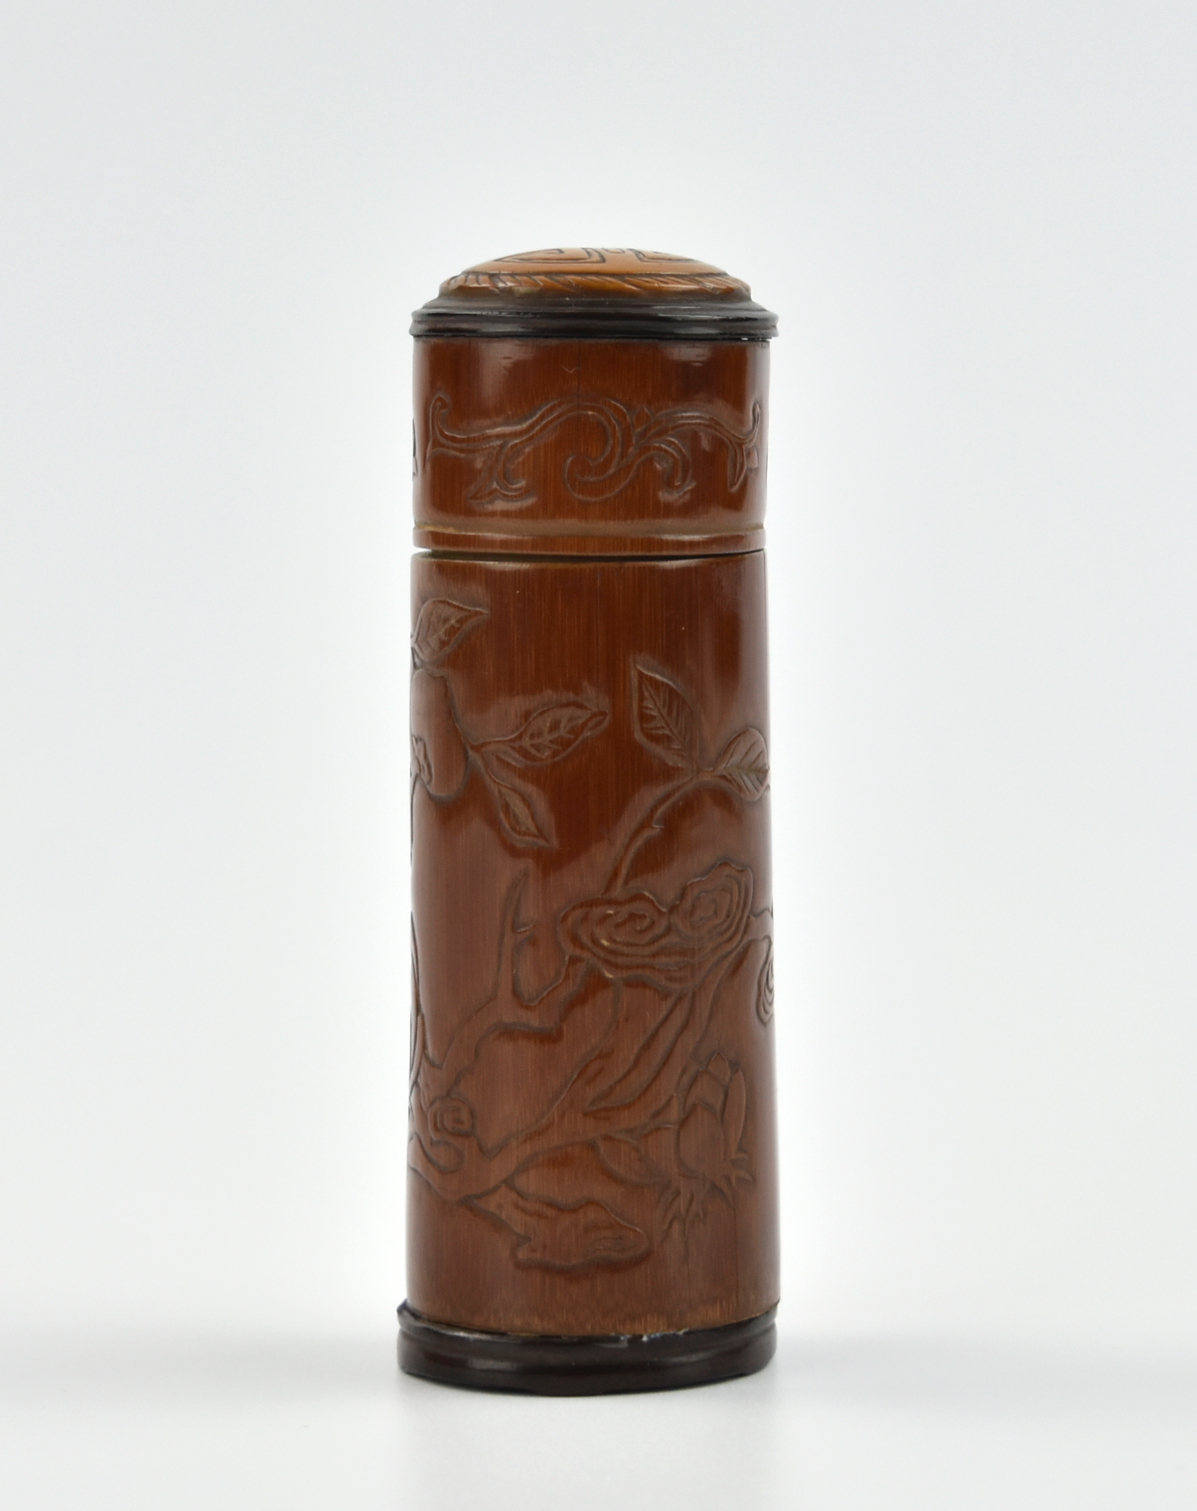 CHINESE BAMBOO CARVED INCENSE CONTAINER,